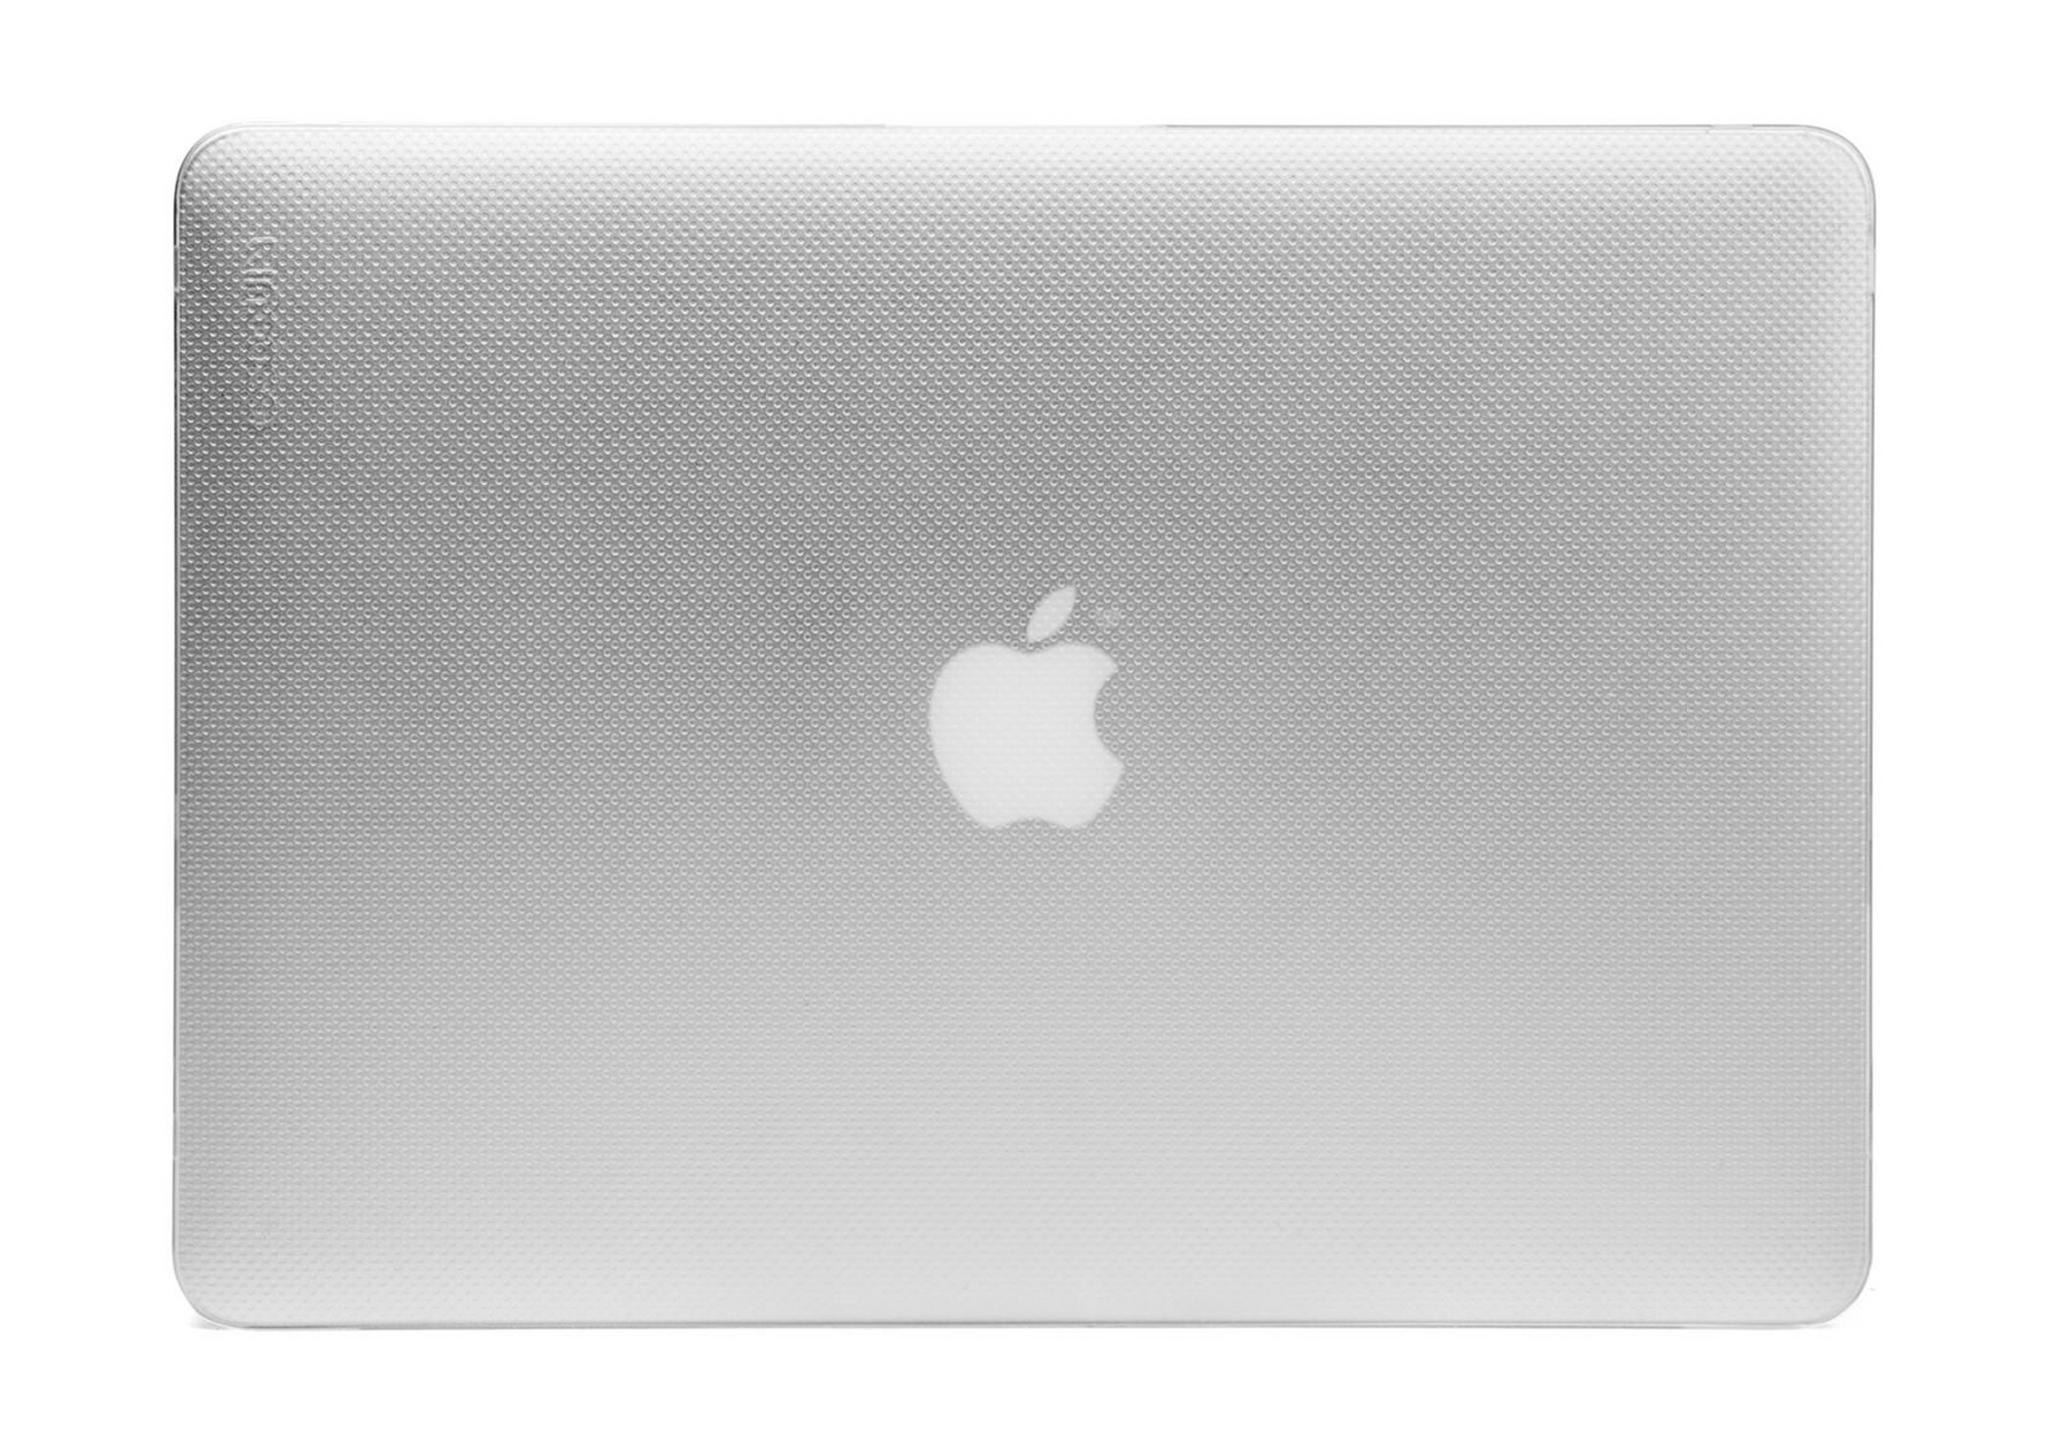 Incase Dots Protective Hardshell Case for MacBook Pro Retina 13.3-inch (CL60608) - Clear